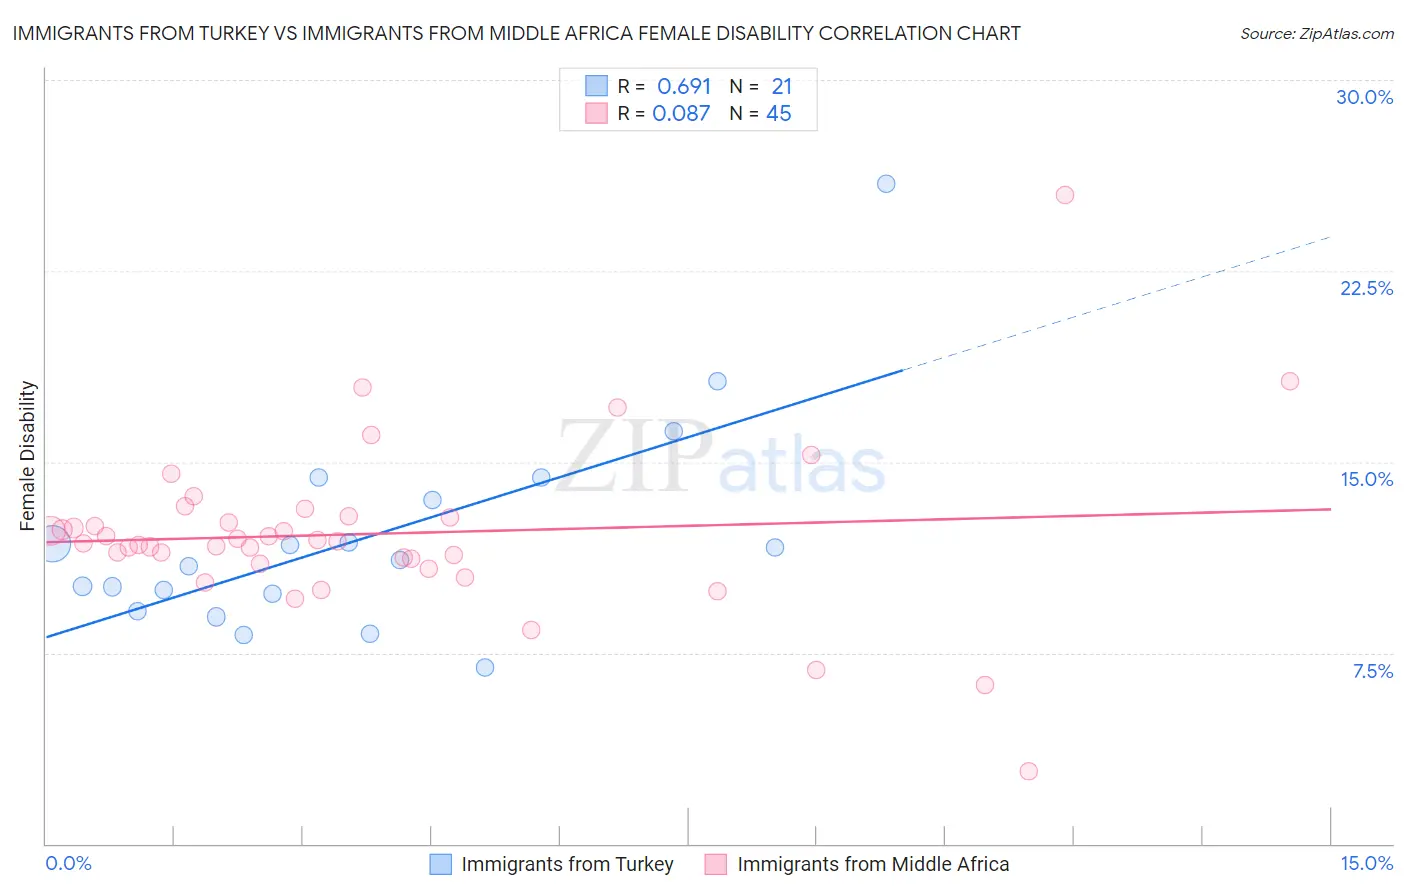 Immigrants from Turkey vs Immigrants from Middle Africa Female Disability